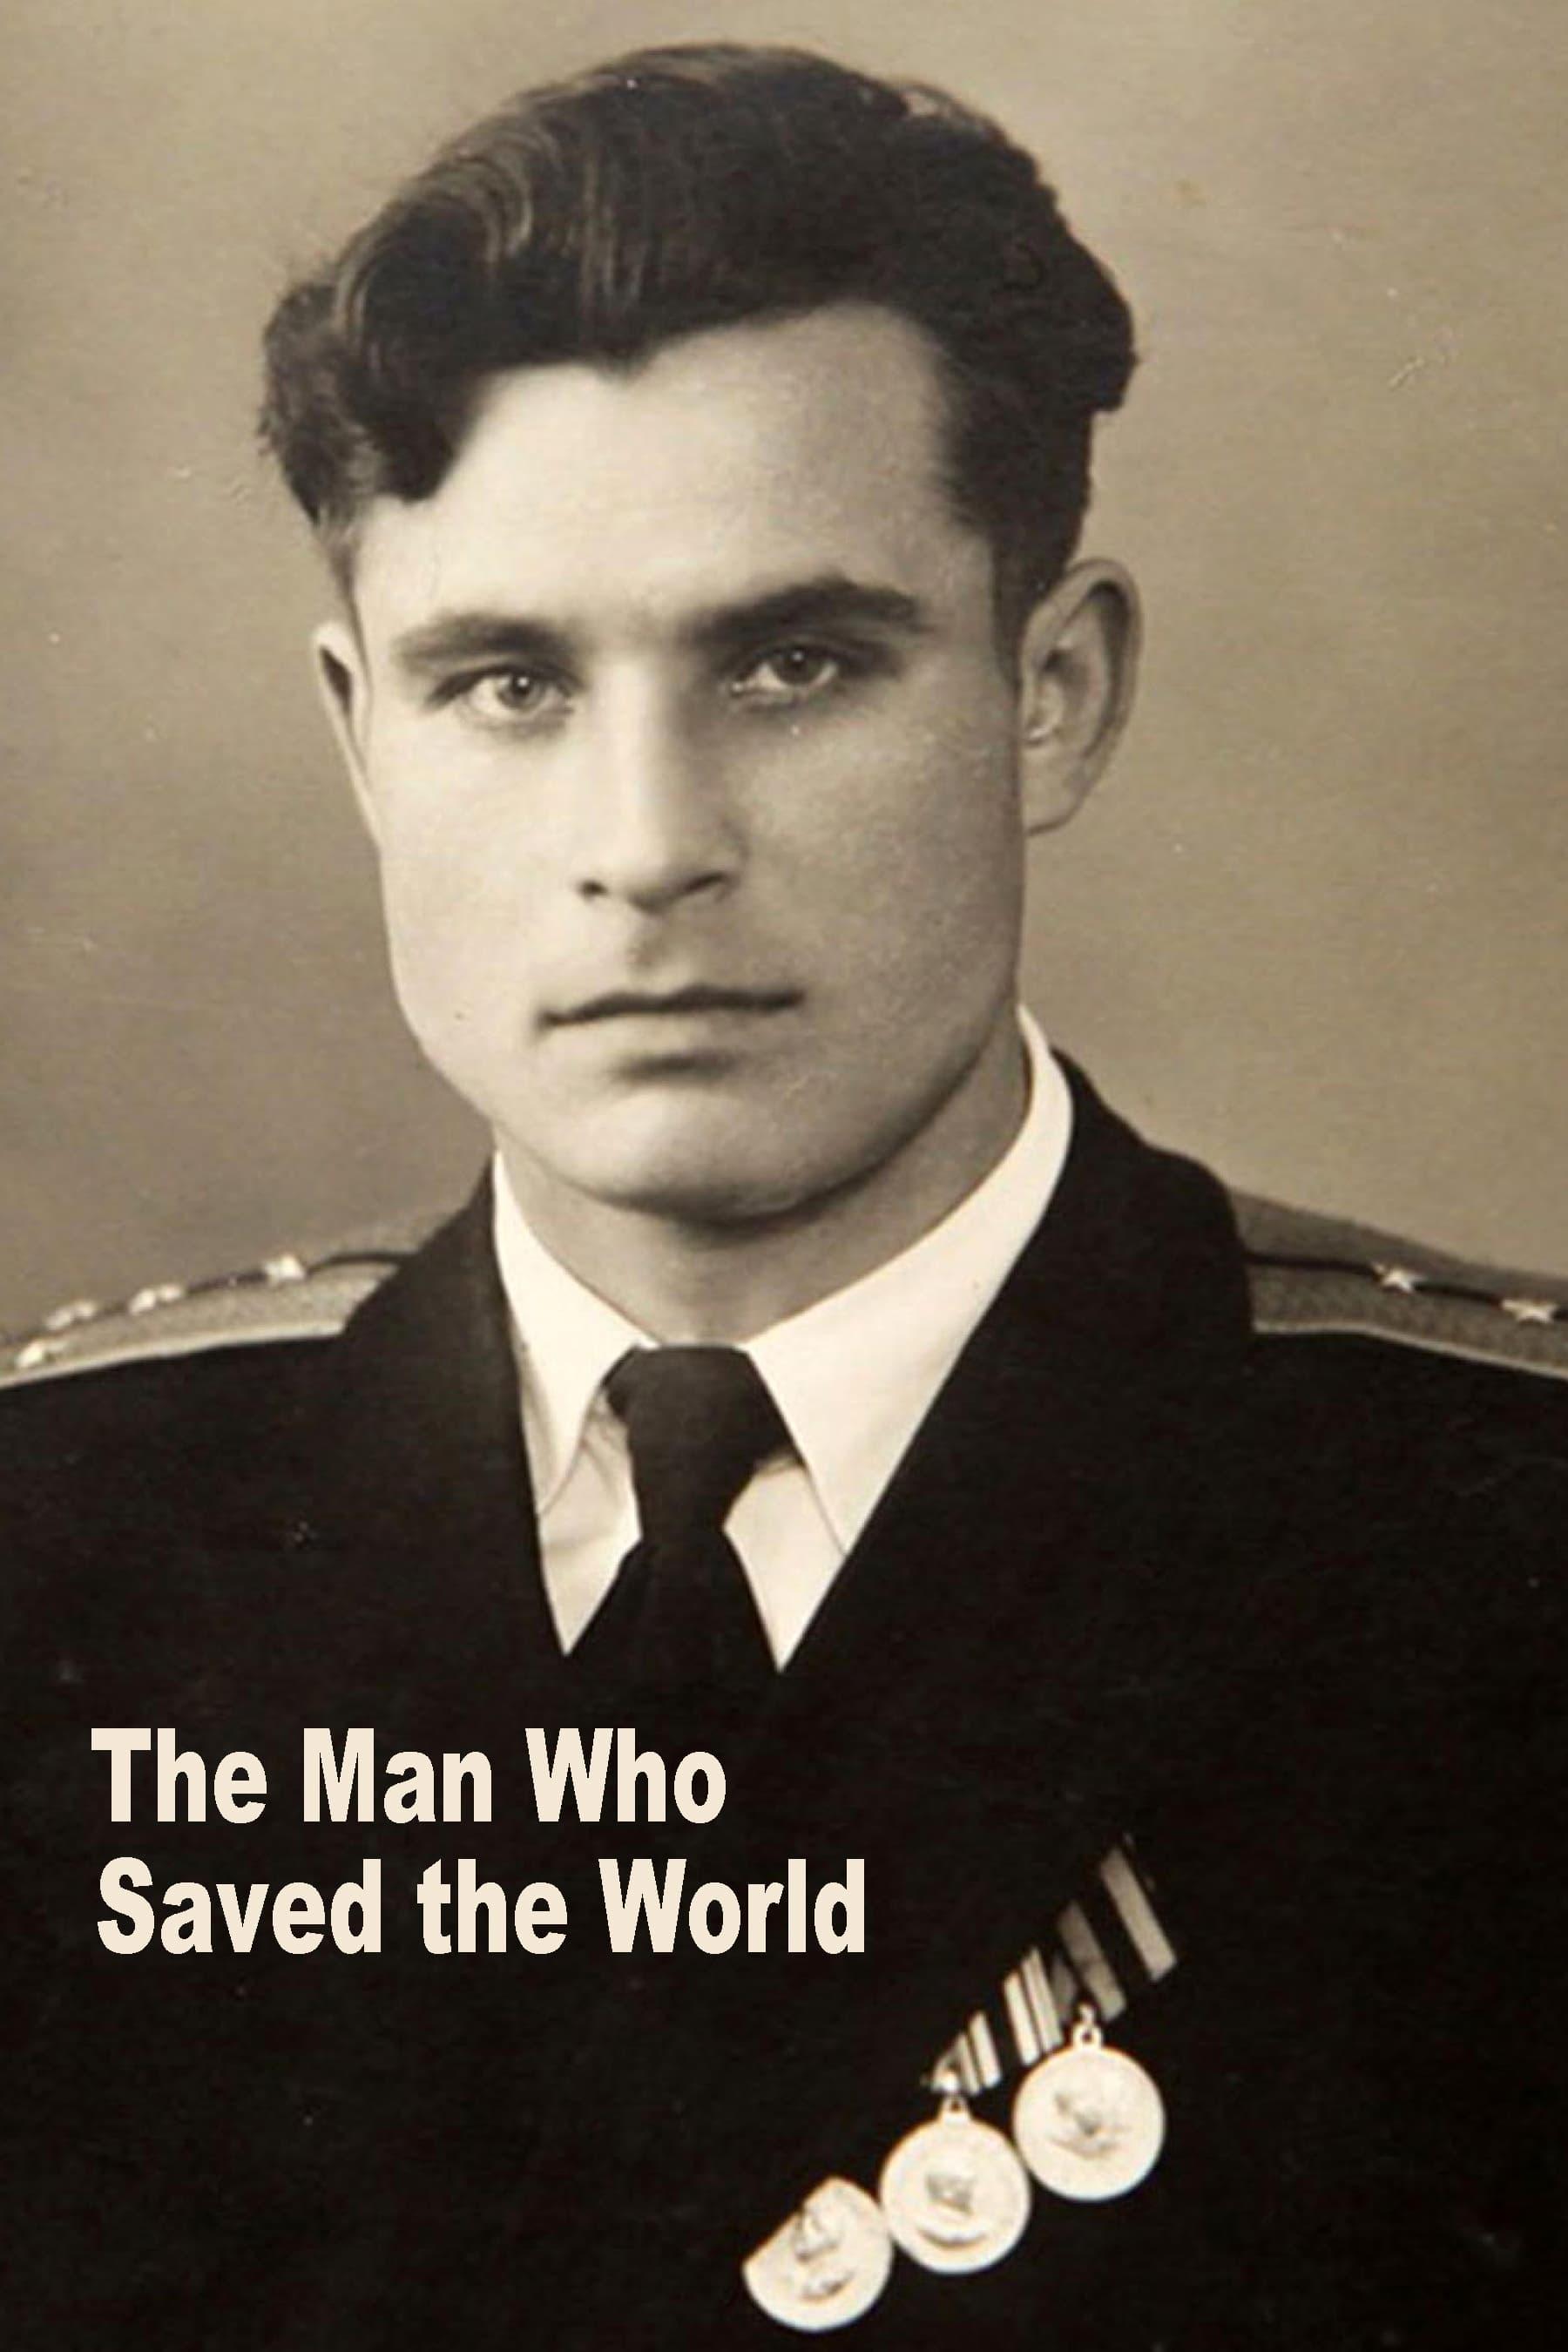 The Man Who Saved the World poster